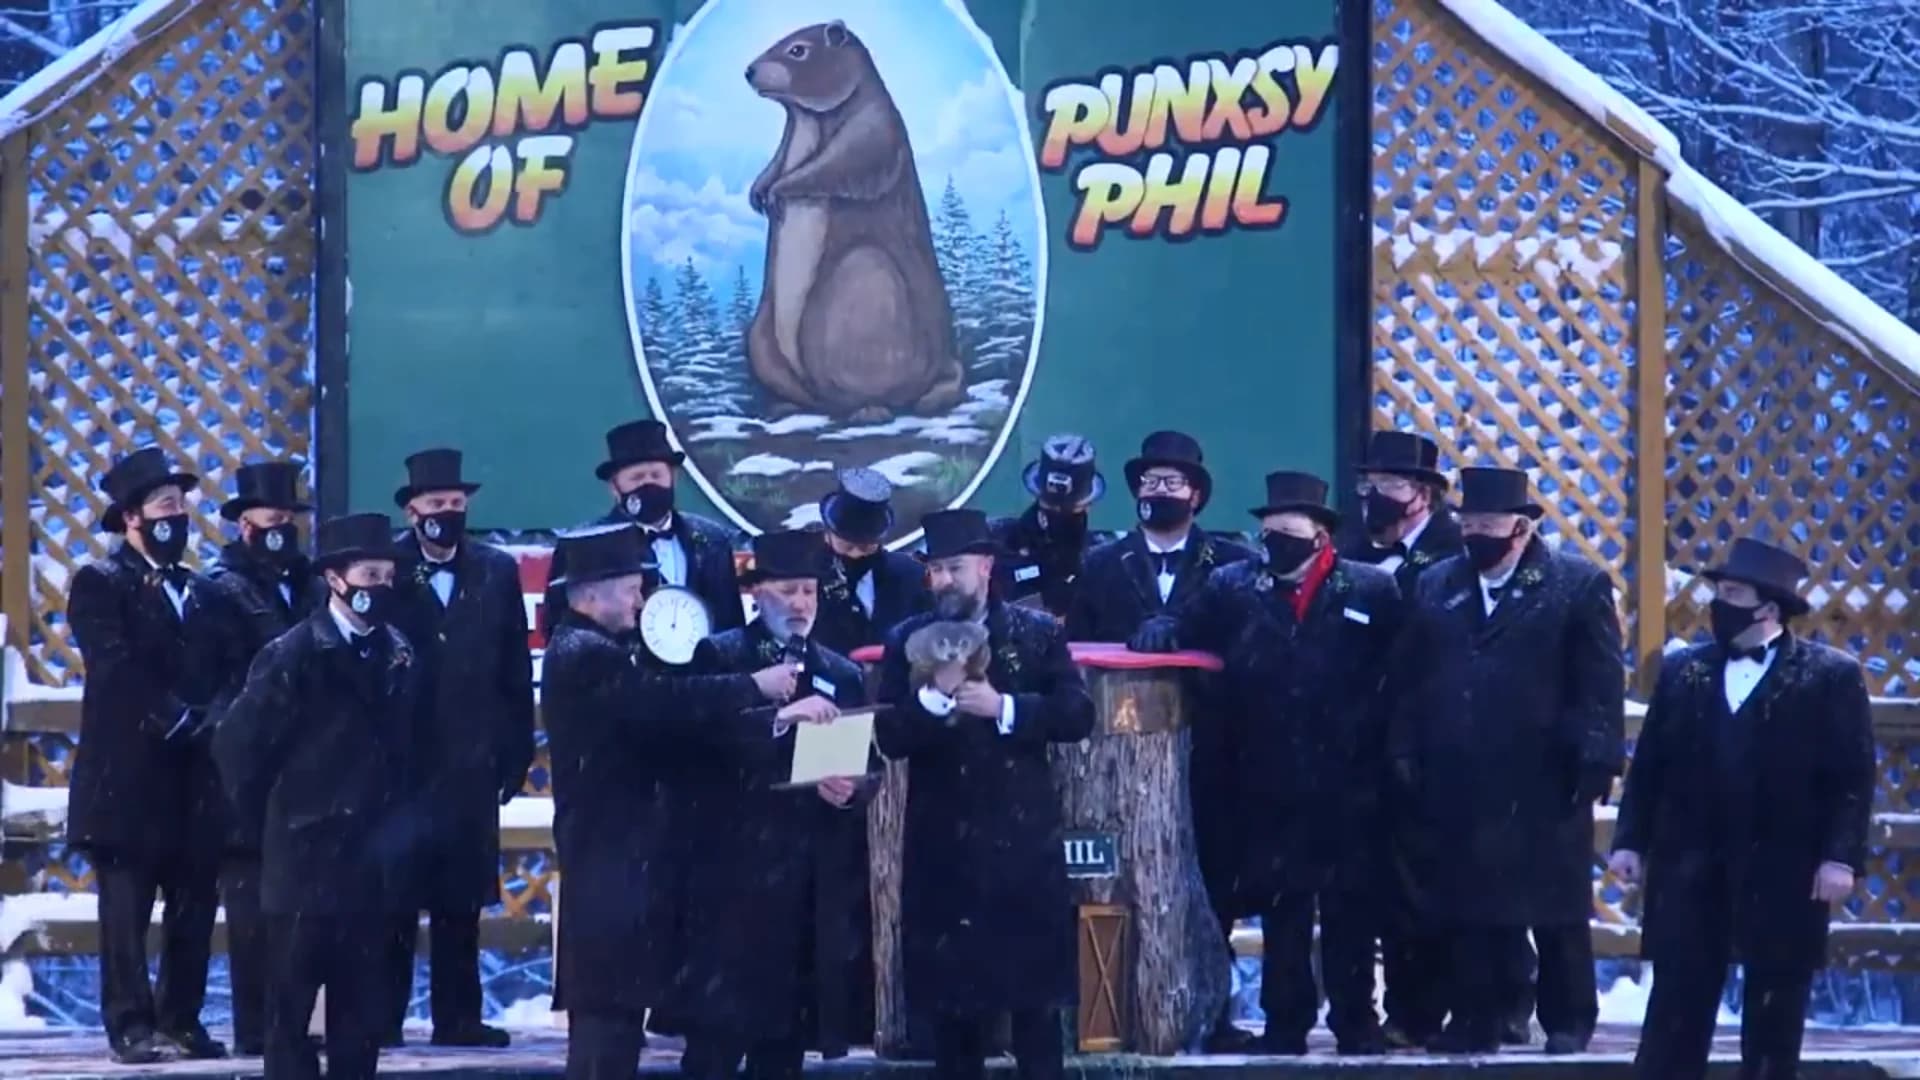 Punxsutawney Phil says there will be 6 more weeks of winter